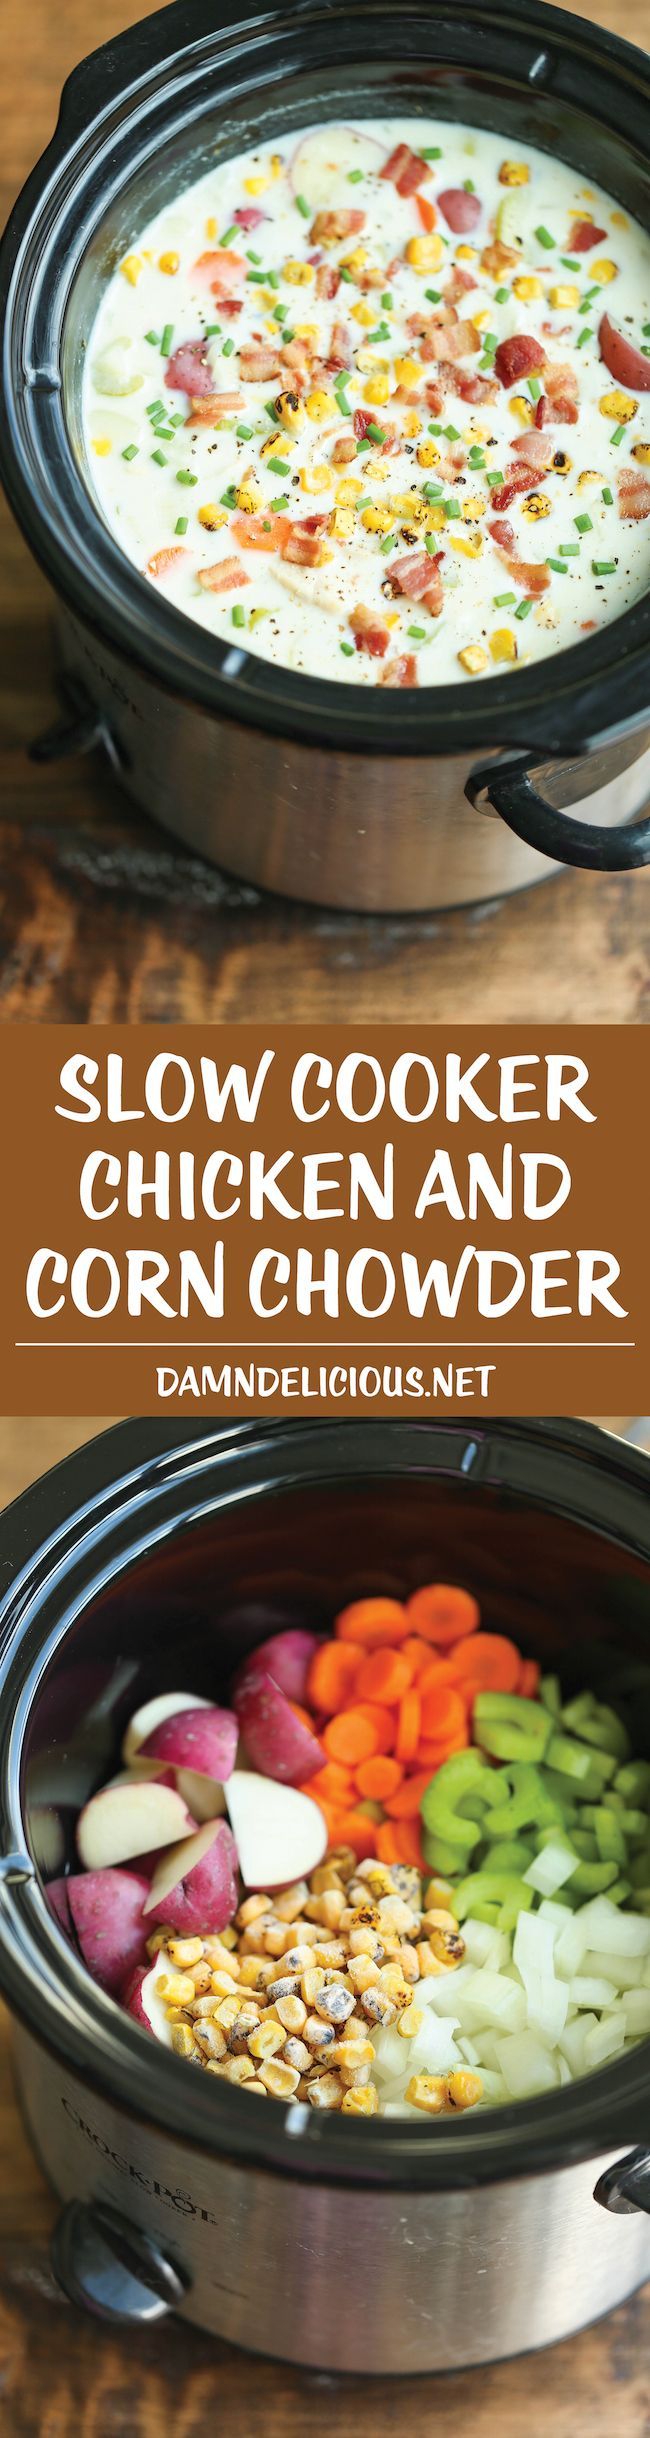 Slow Cooker Chicken and Corn Chowder – Such a hearty, comforting and CREAMY soup, made right in the cr